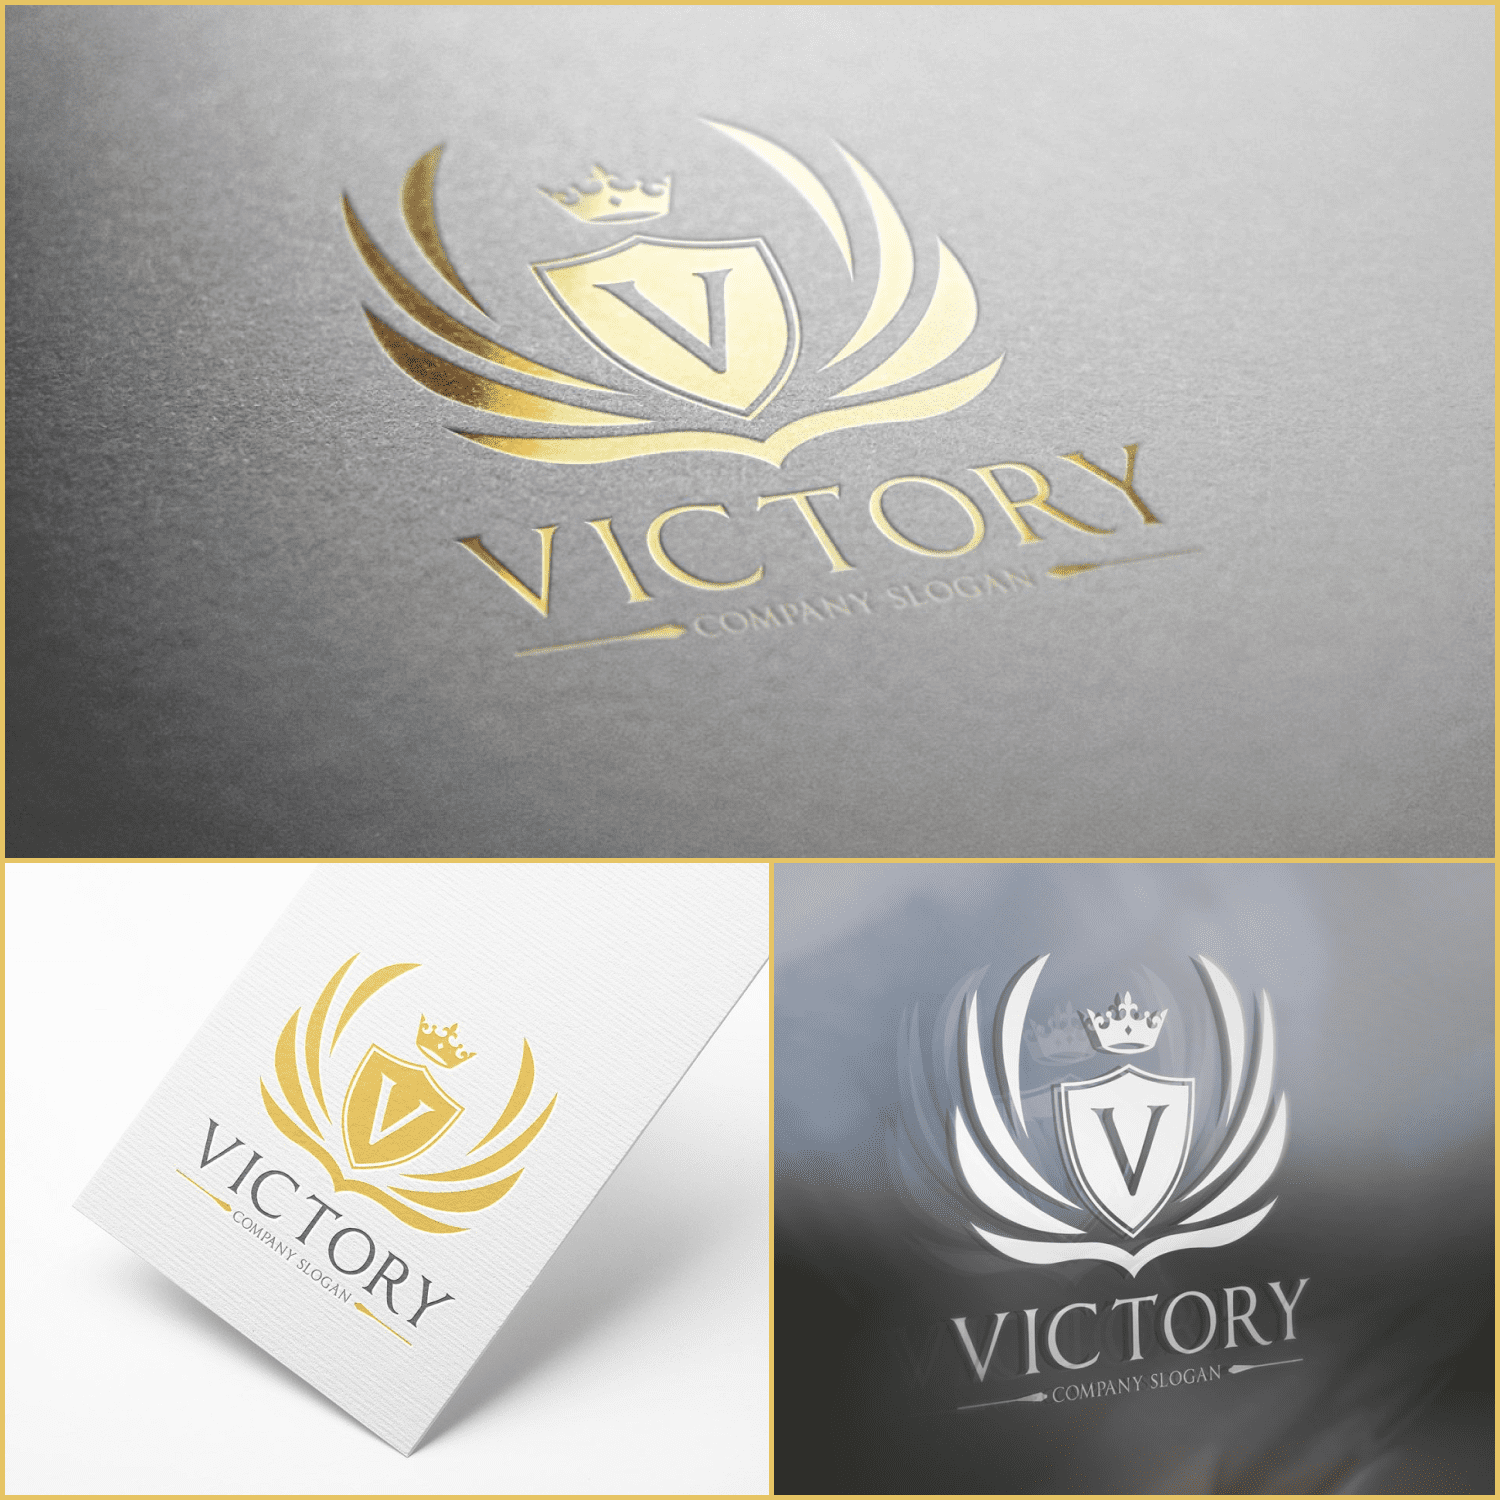 Victory Logo cover.